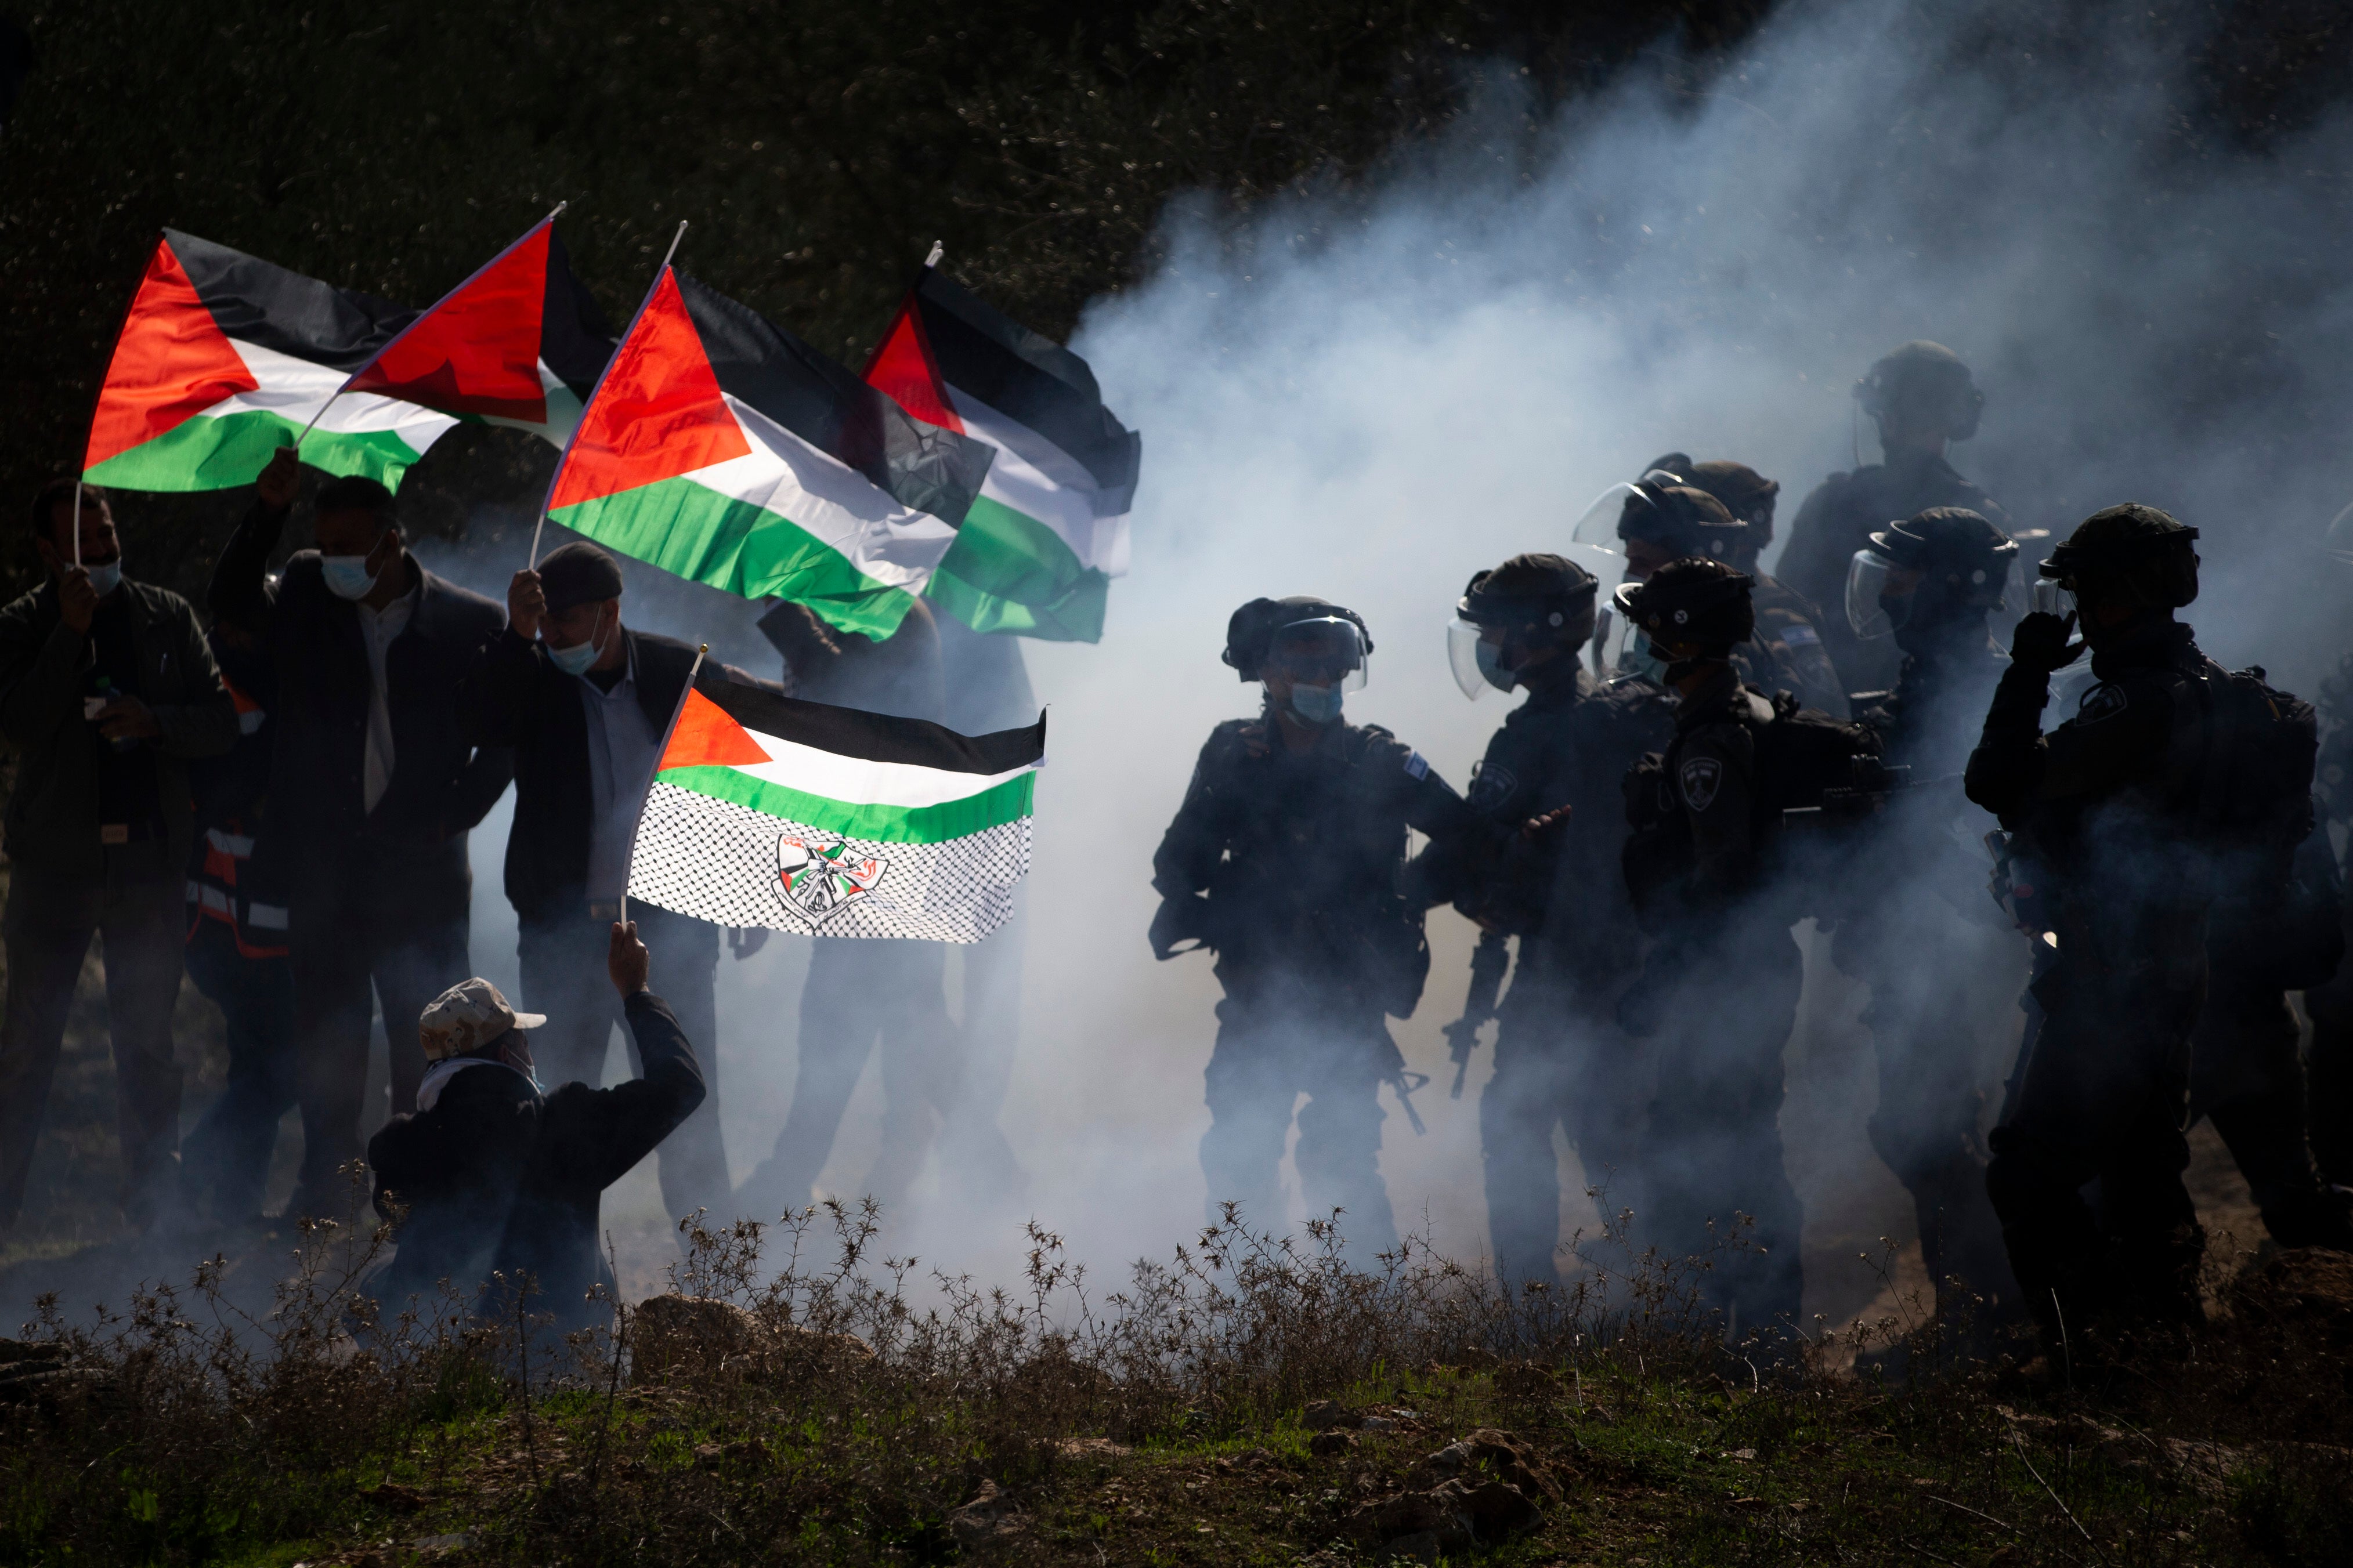 Israeli border police officers and Palestinians clash during a protest against the expansion of Israeli Jewish settlements in the West Bank